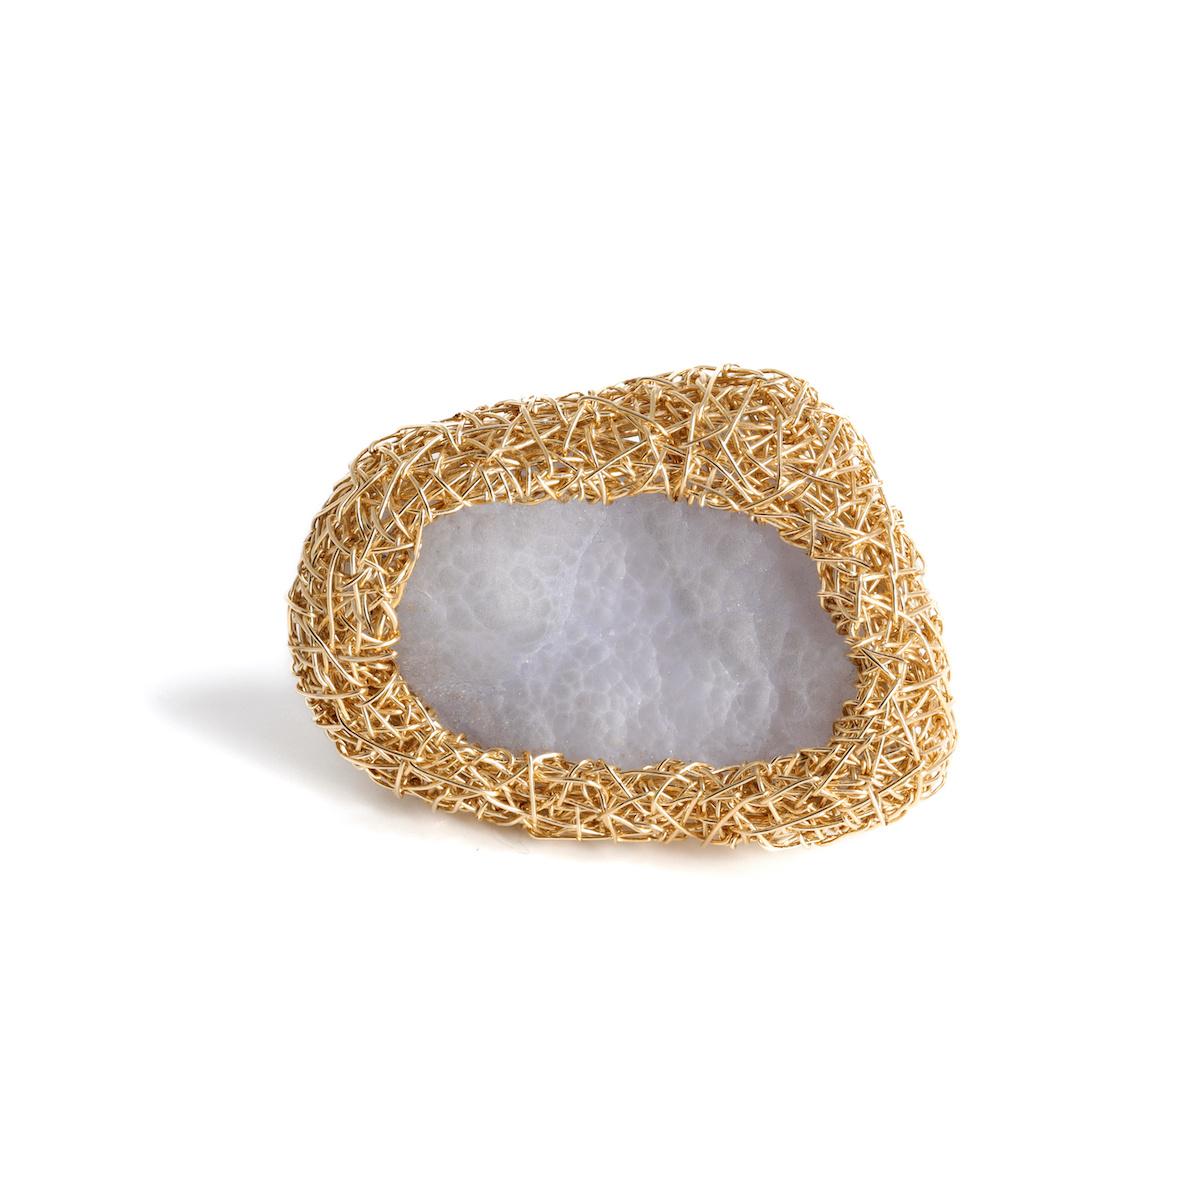 Blue raw Chalcedony Cocktail ring 14 kt yellow gold filled one of a kind design For Sale 4